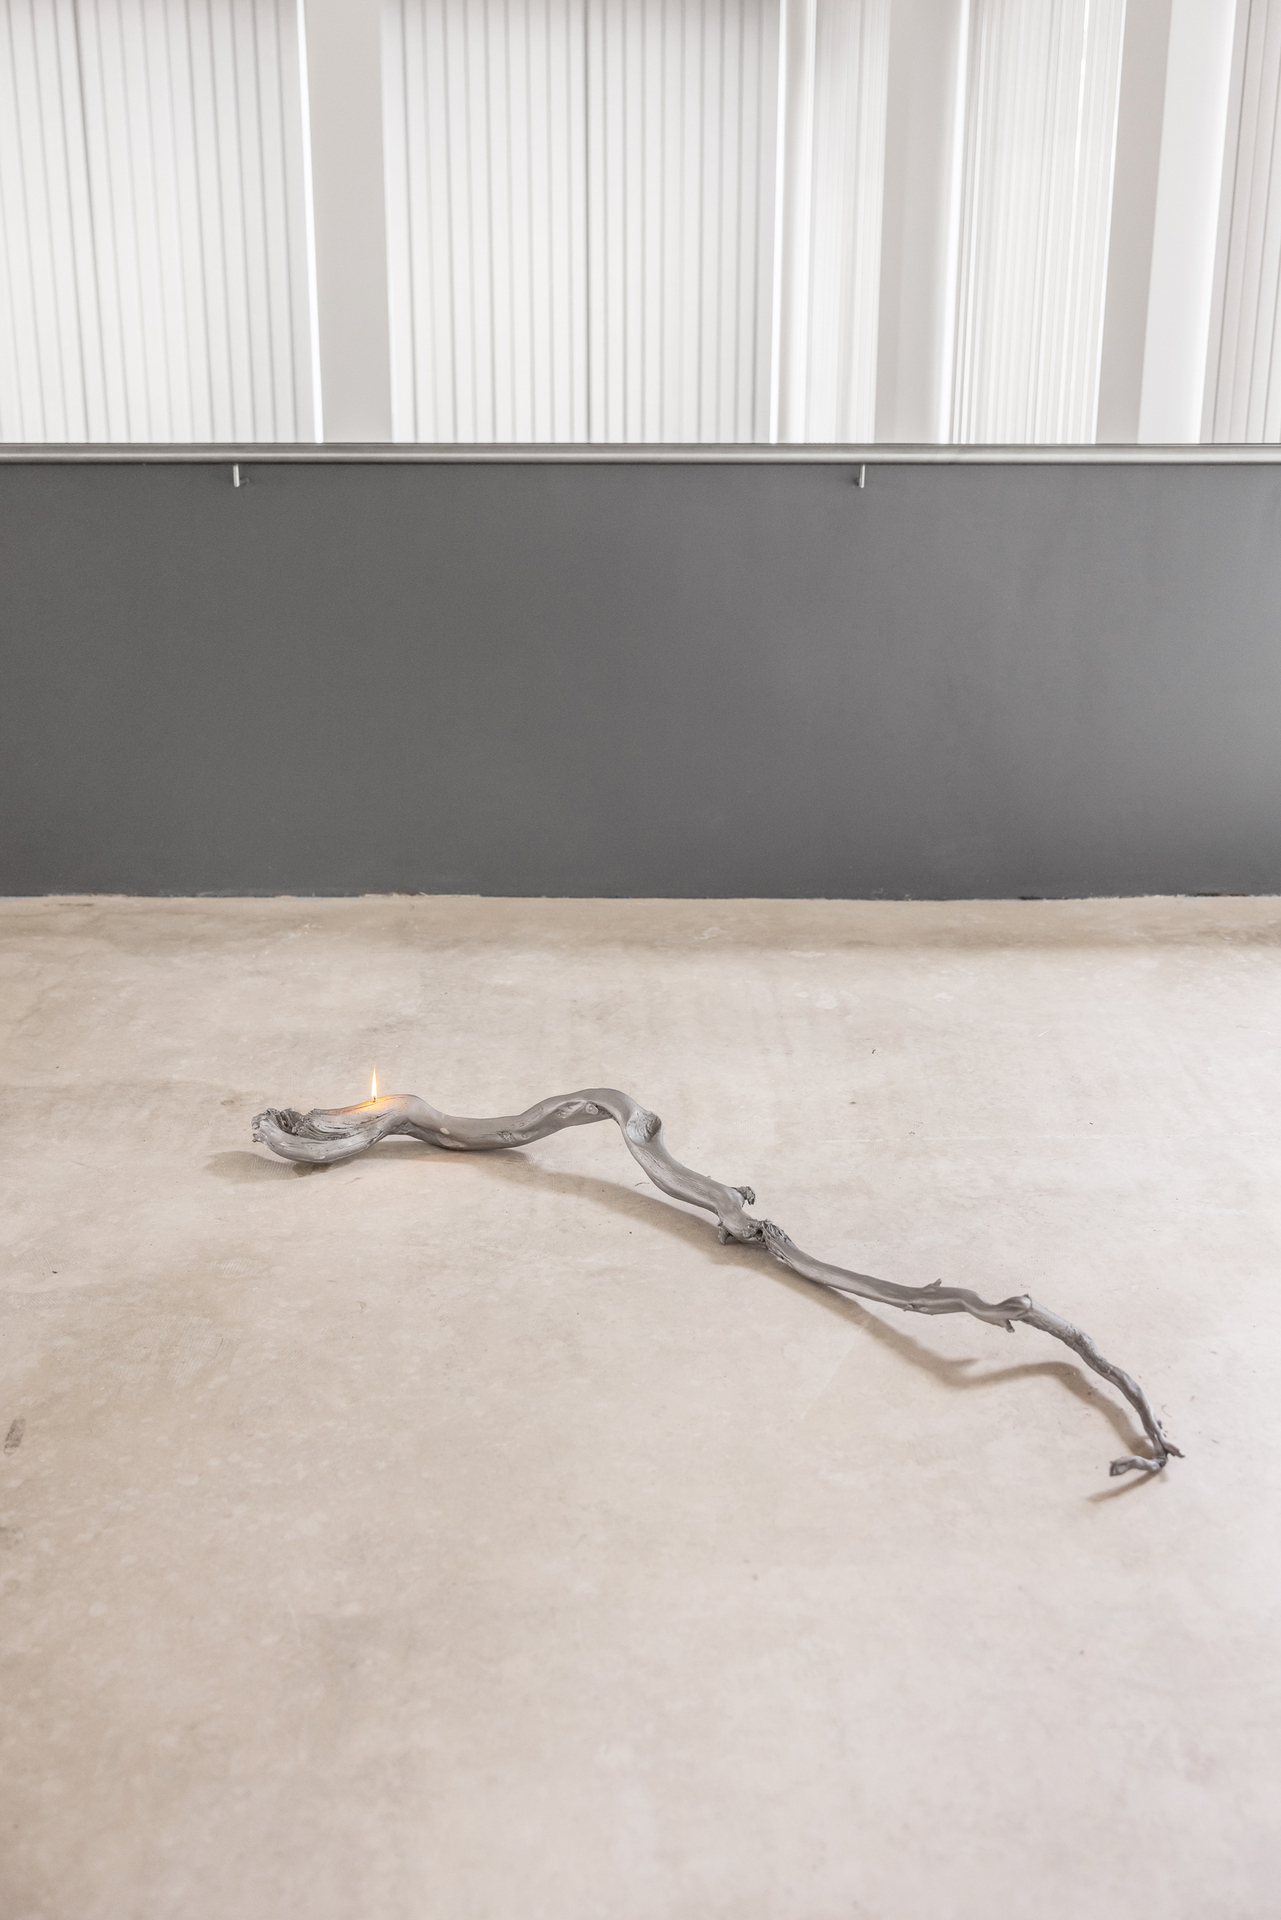 Ariel Schlesinger, At Arm‘s Length, 2019 sandblasted aluminum, lamp oil, cotton wick Photo: Roland Baege Courtesy: The artist and Dvir Gallery